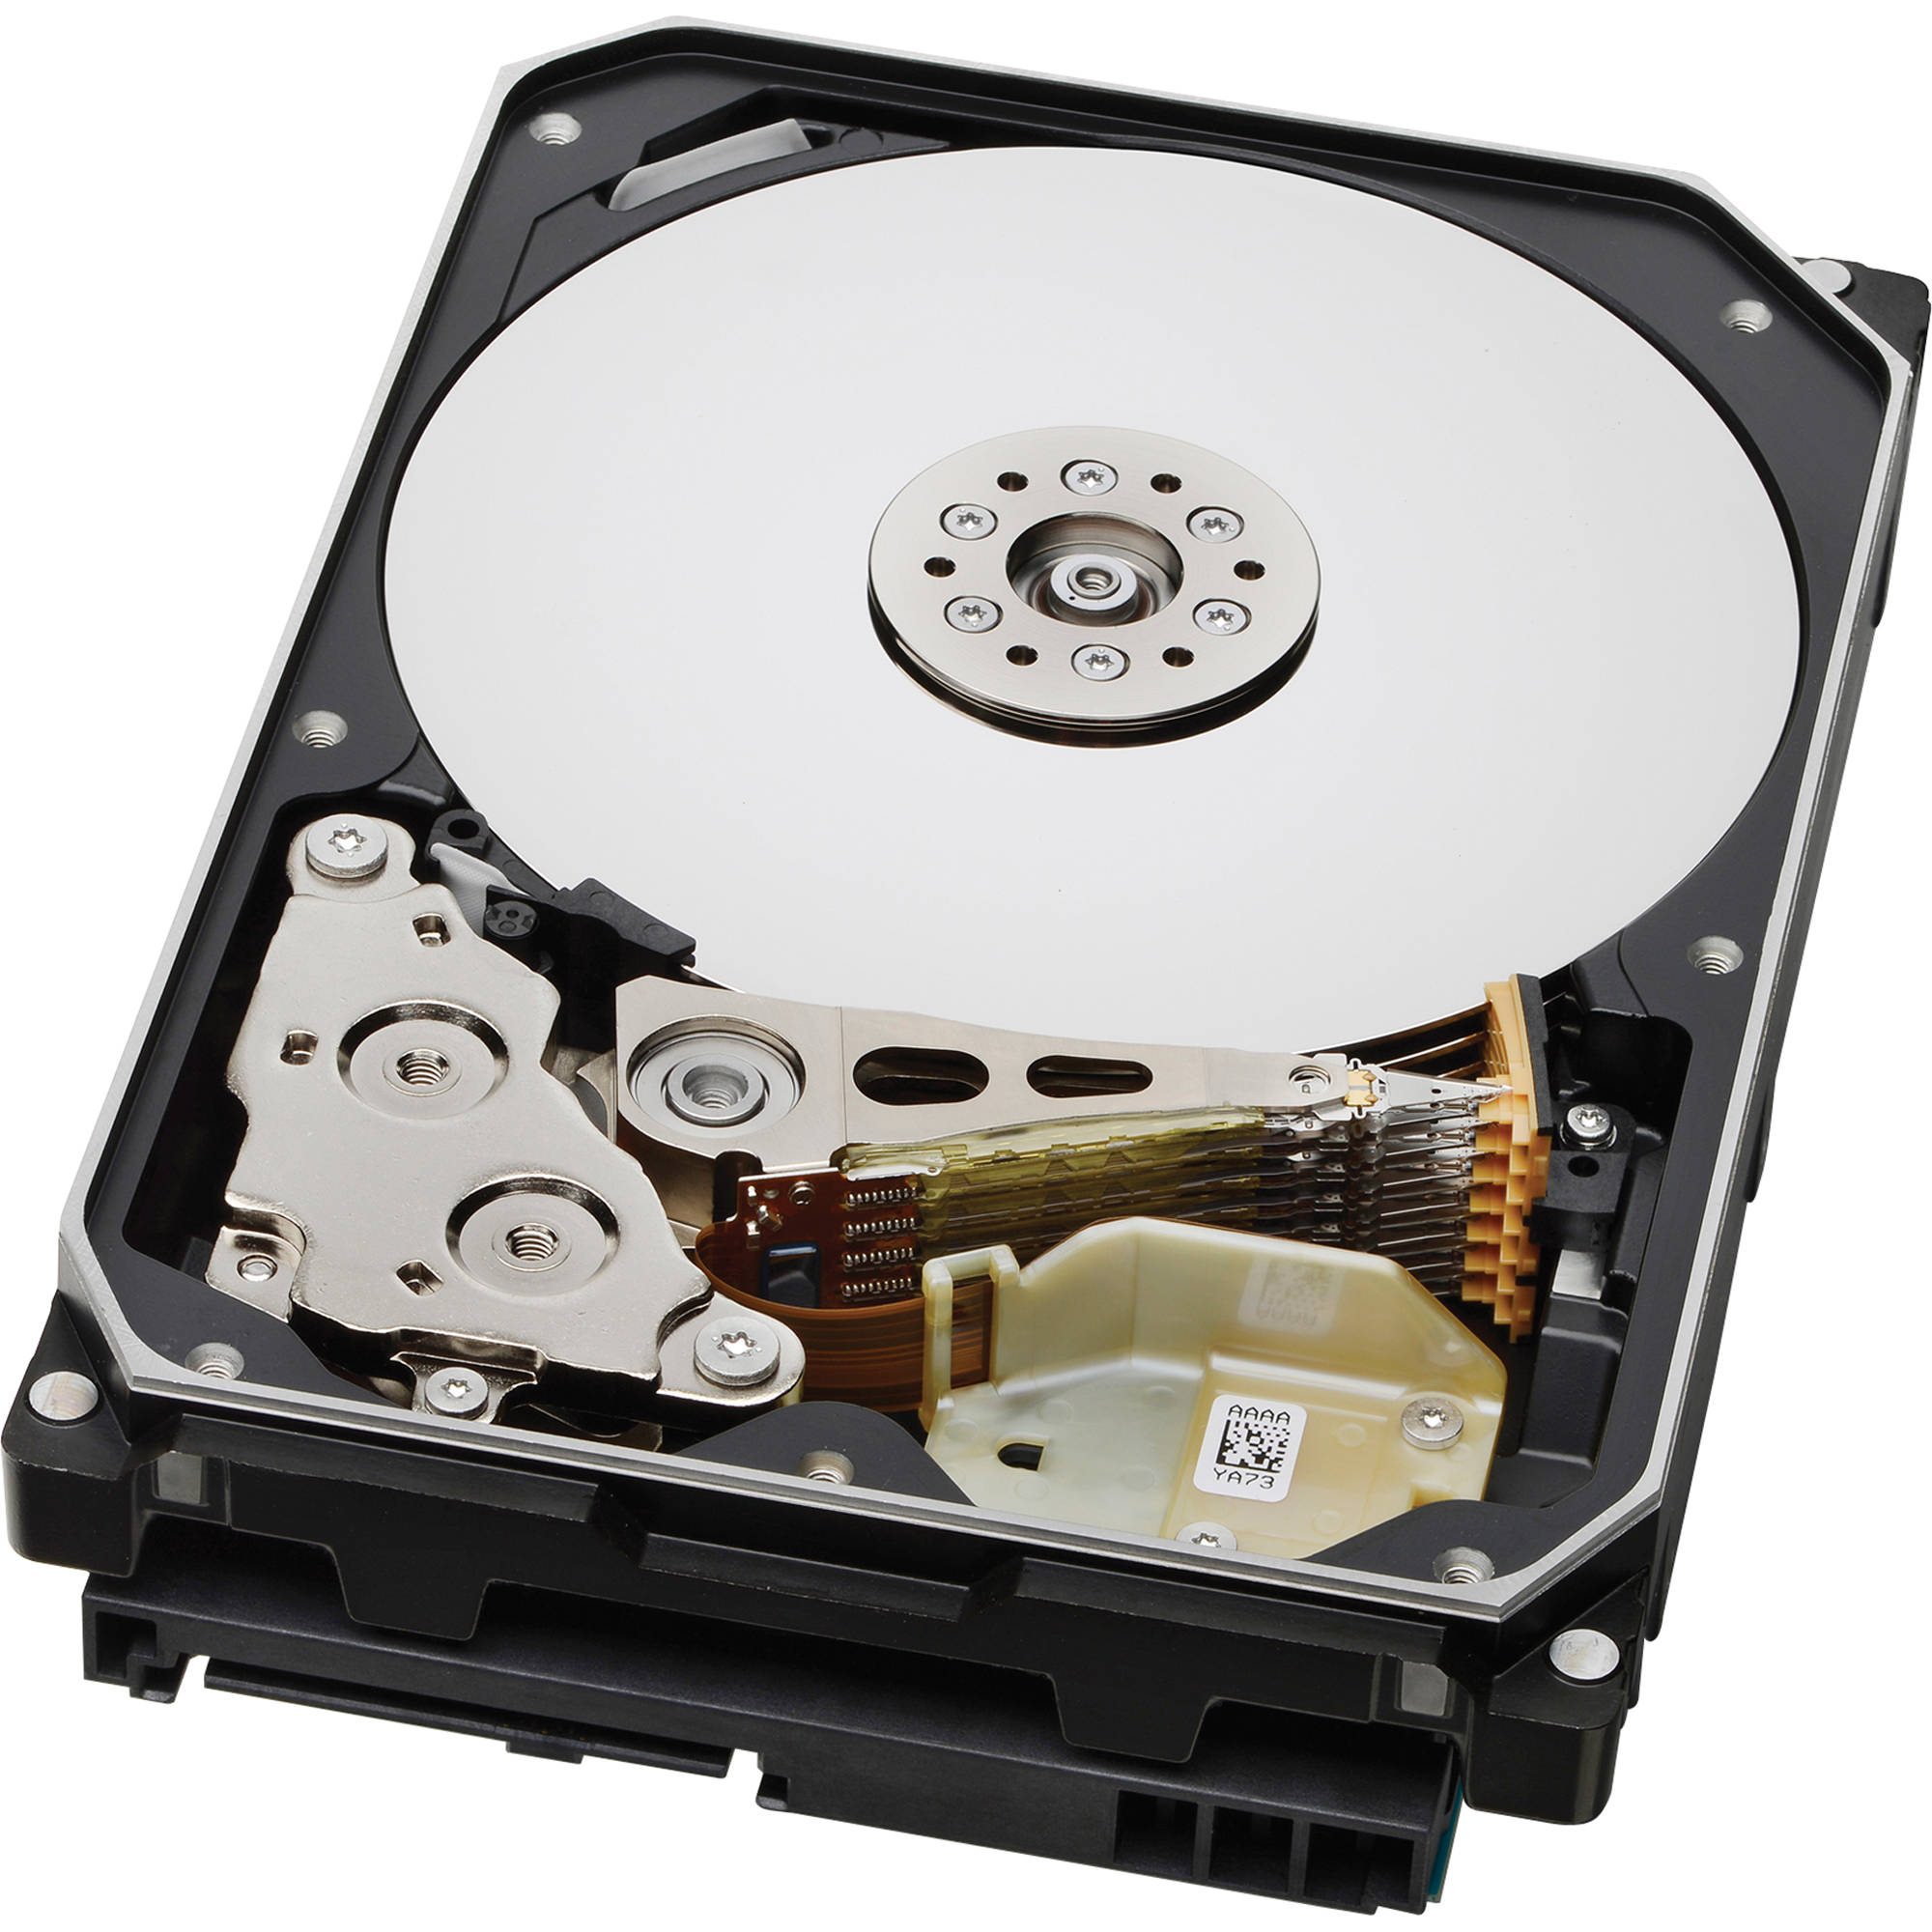 What are Helium Hard Drives?